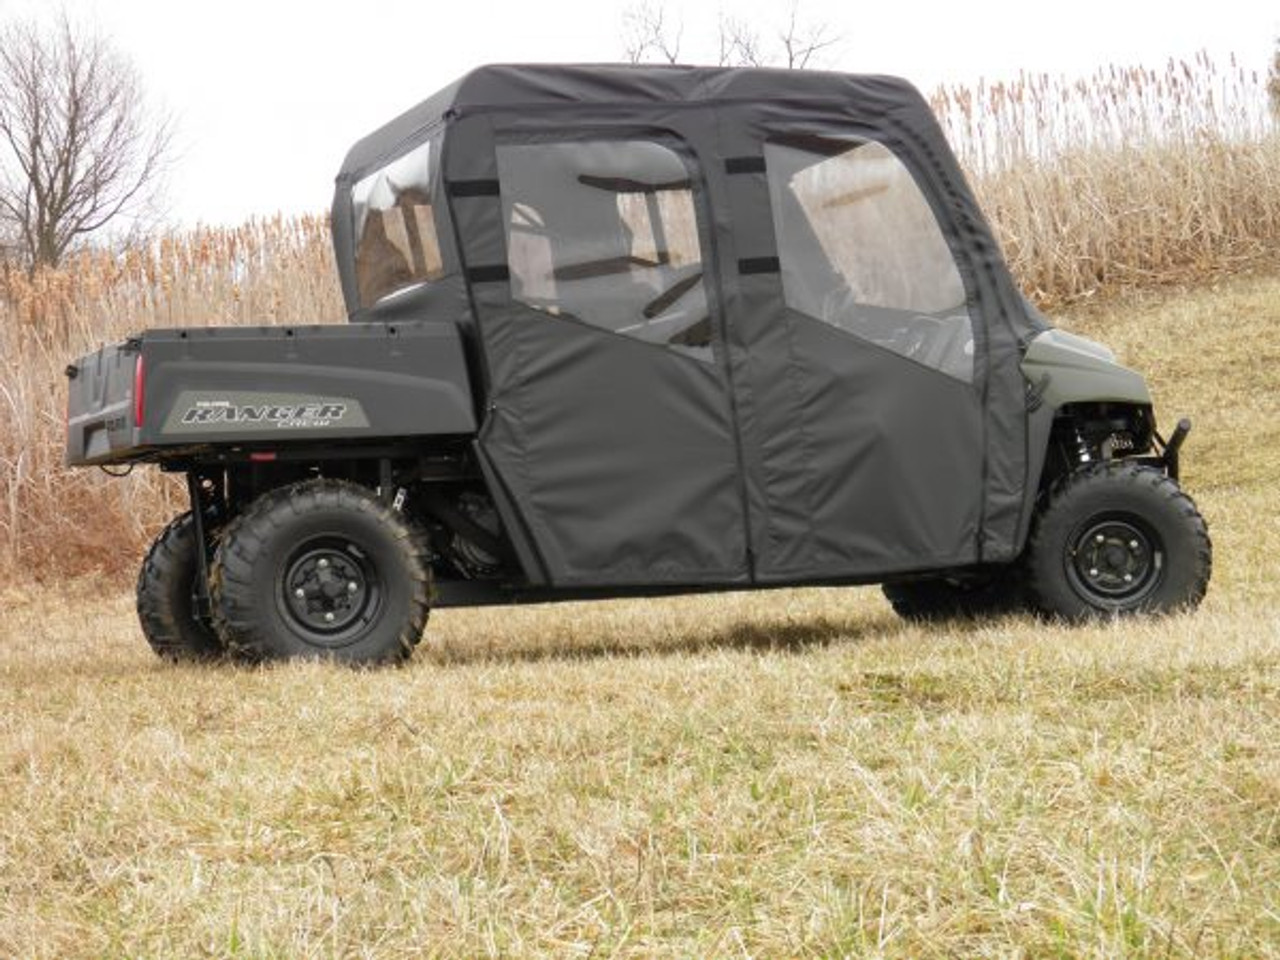 3 Star side x side Polaris Ranger Mid-Size Crew 500/570 full cab enclosure with vinyl windshield side view